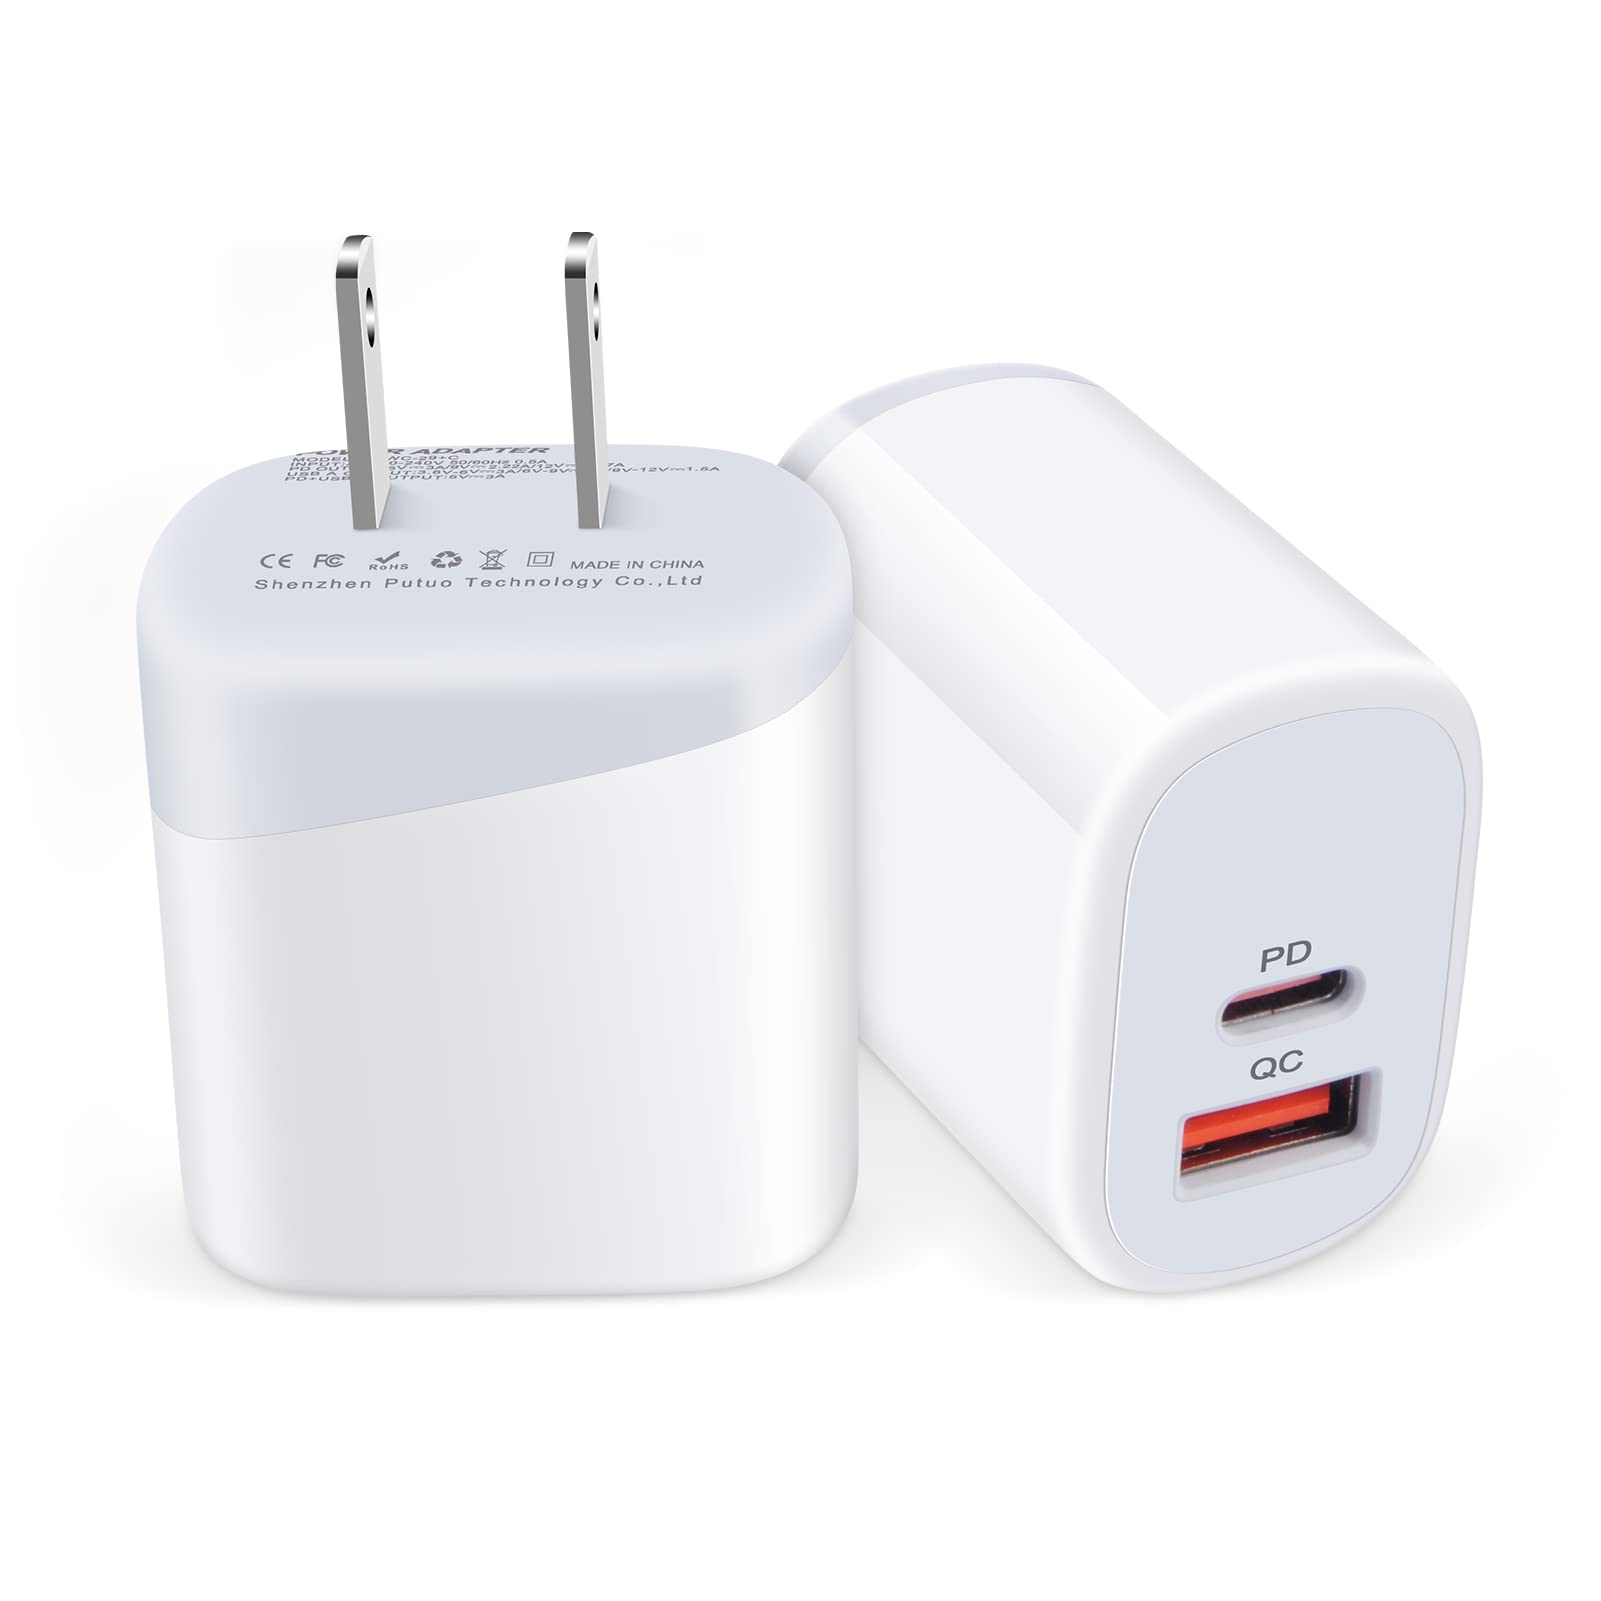 android-adapter-for-iphone-compatibility-and-functionality